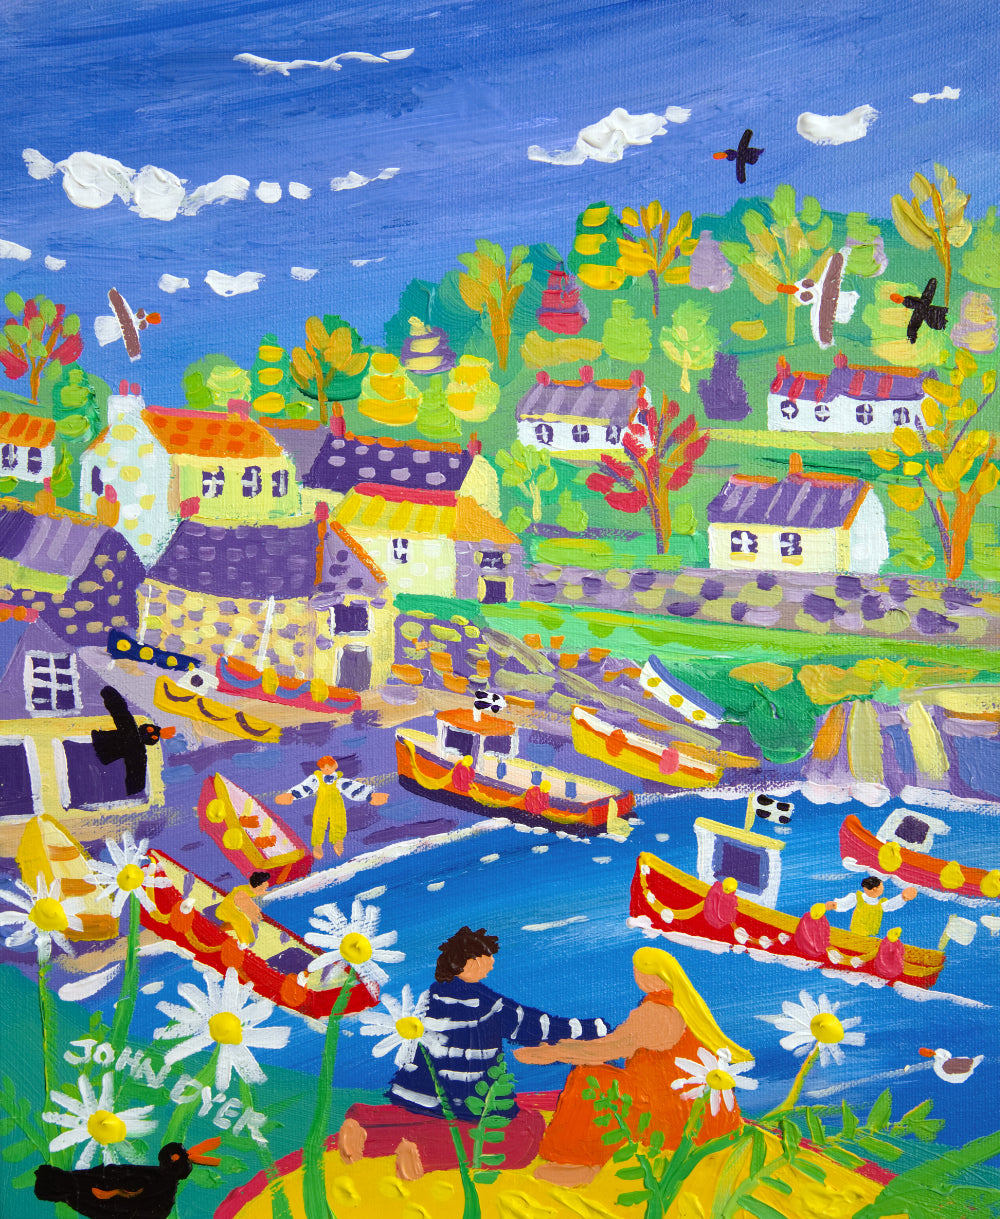 John Dyer Painting. Cadgwith Picnic